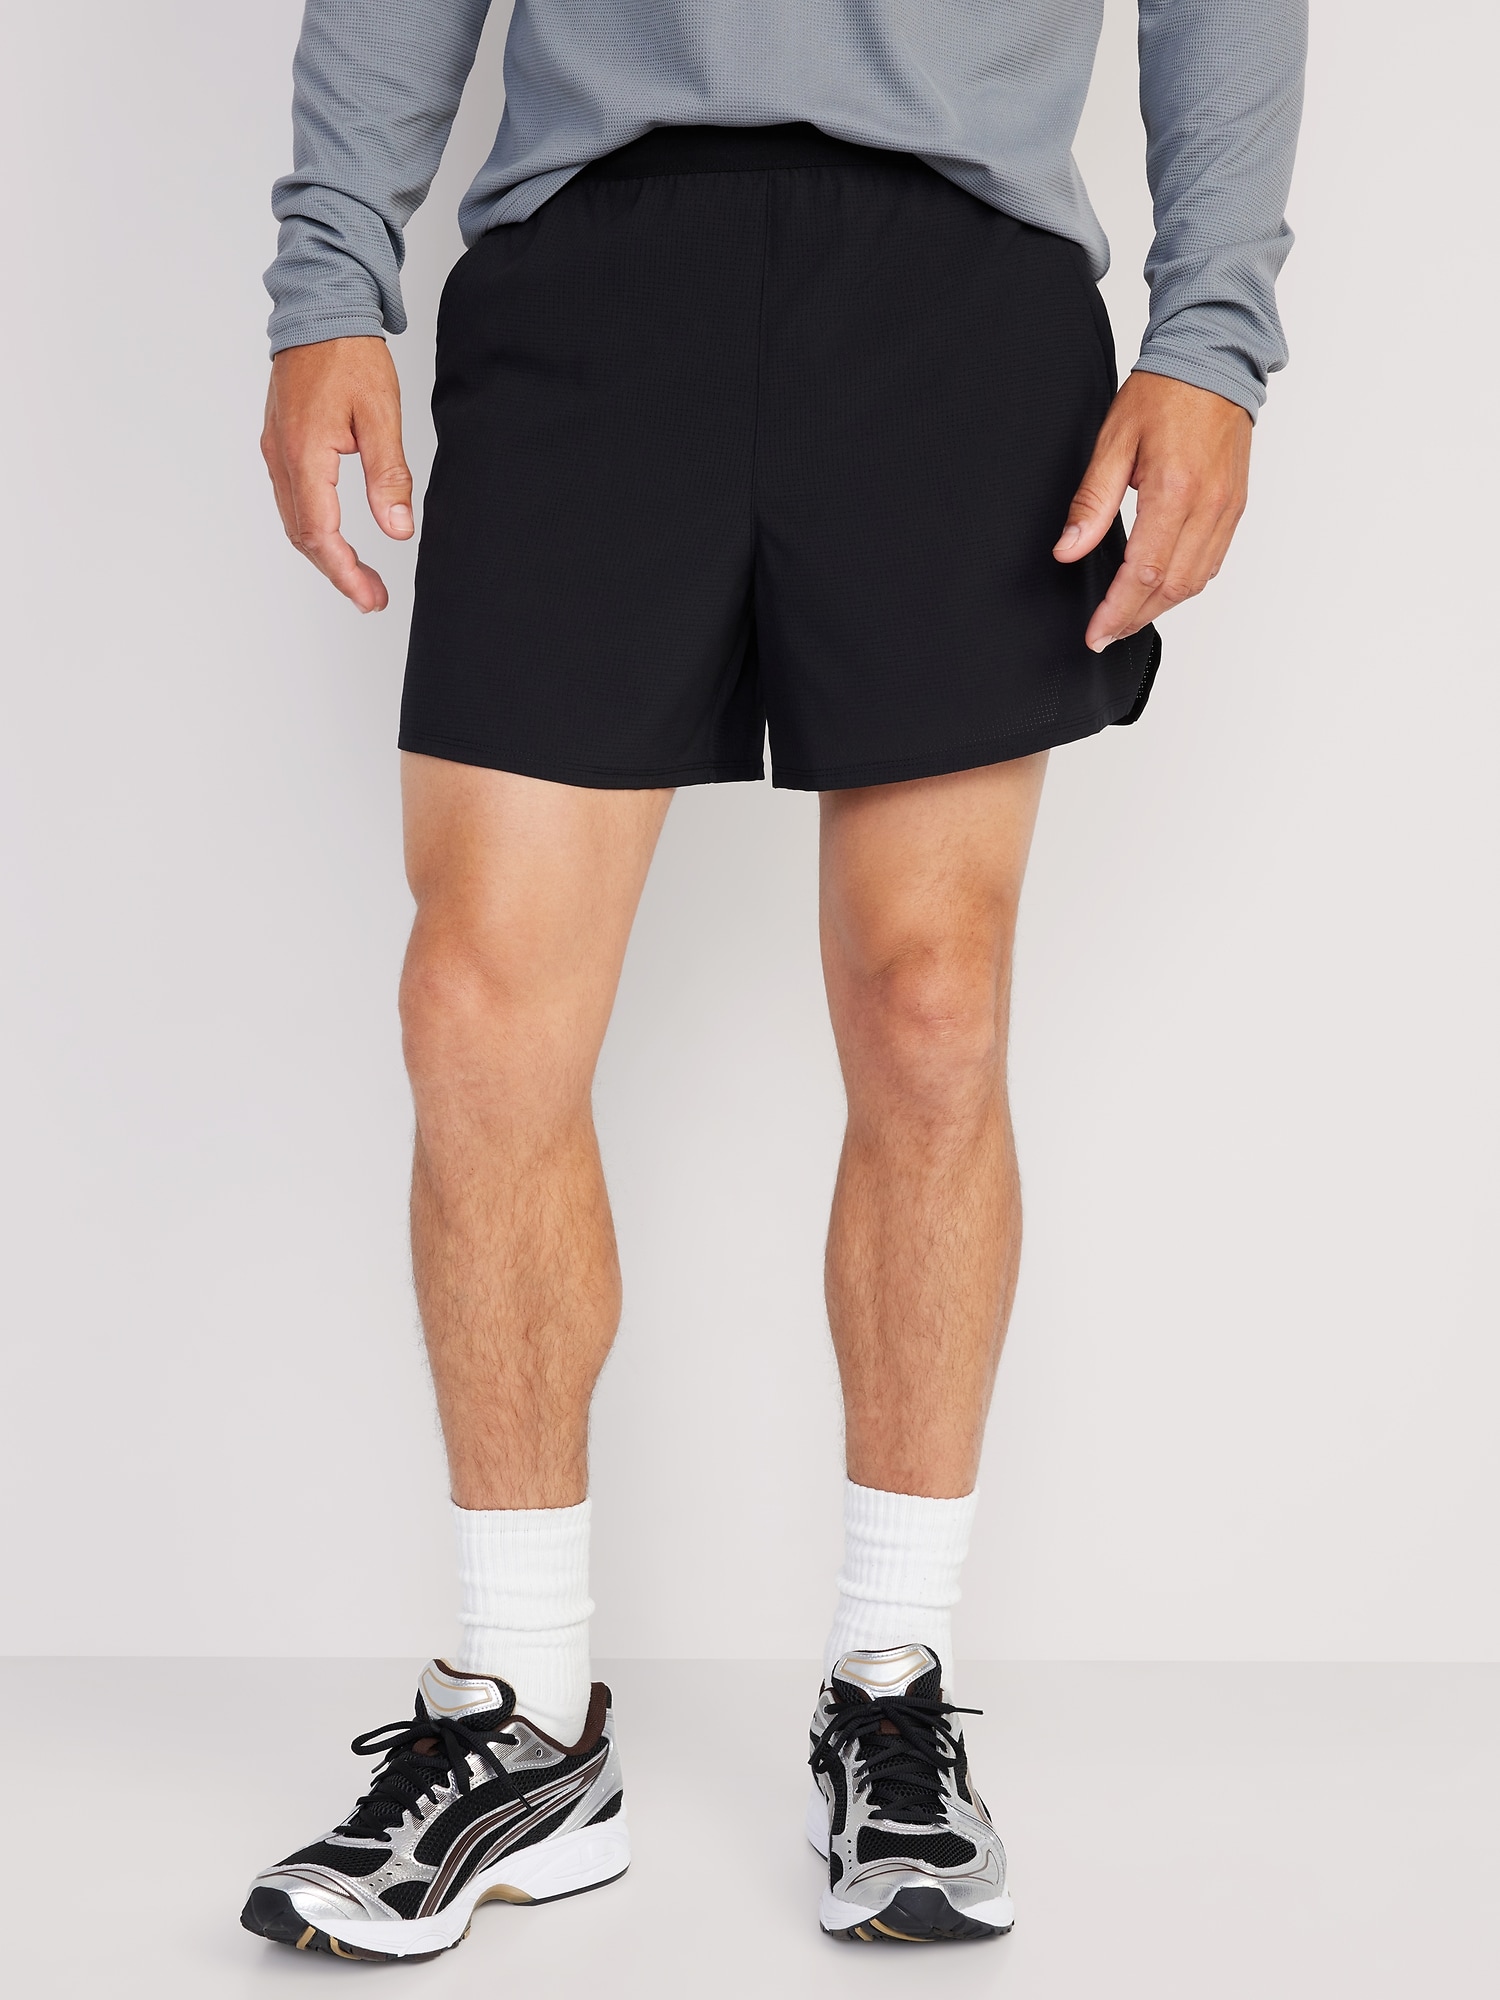 Men's Shorts with Zipper Pockets | Old Navy